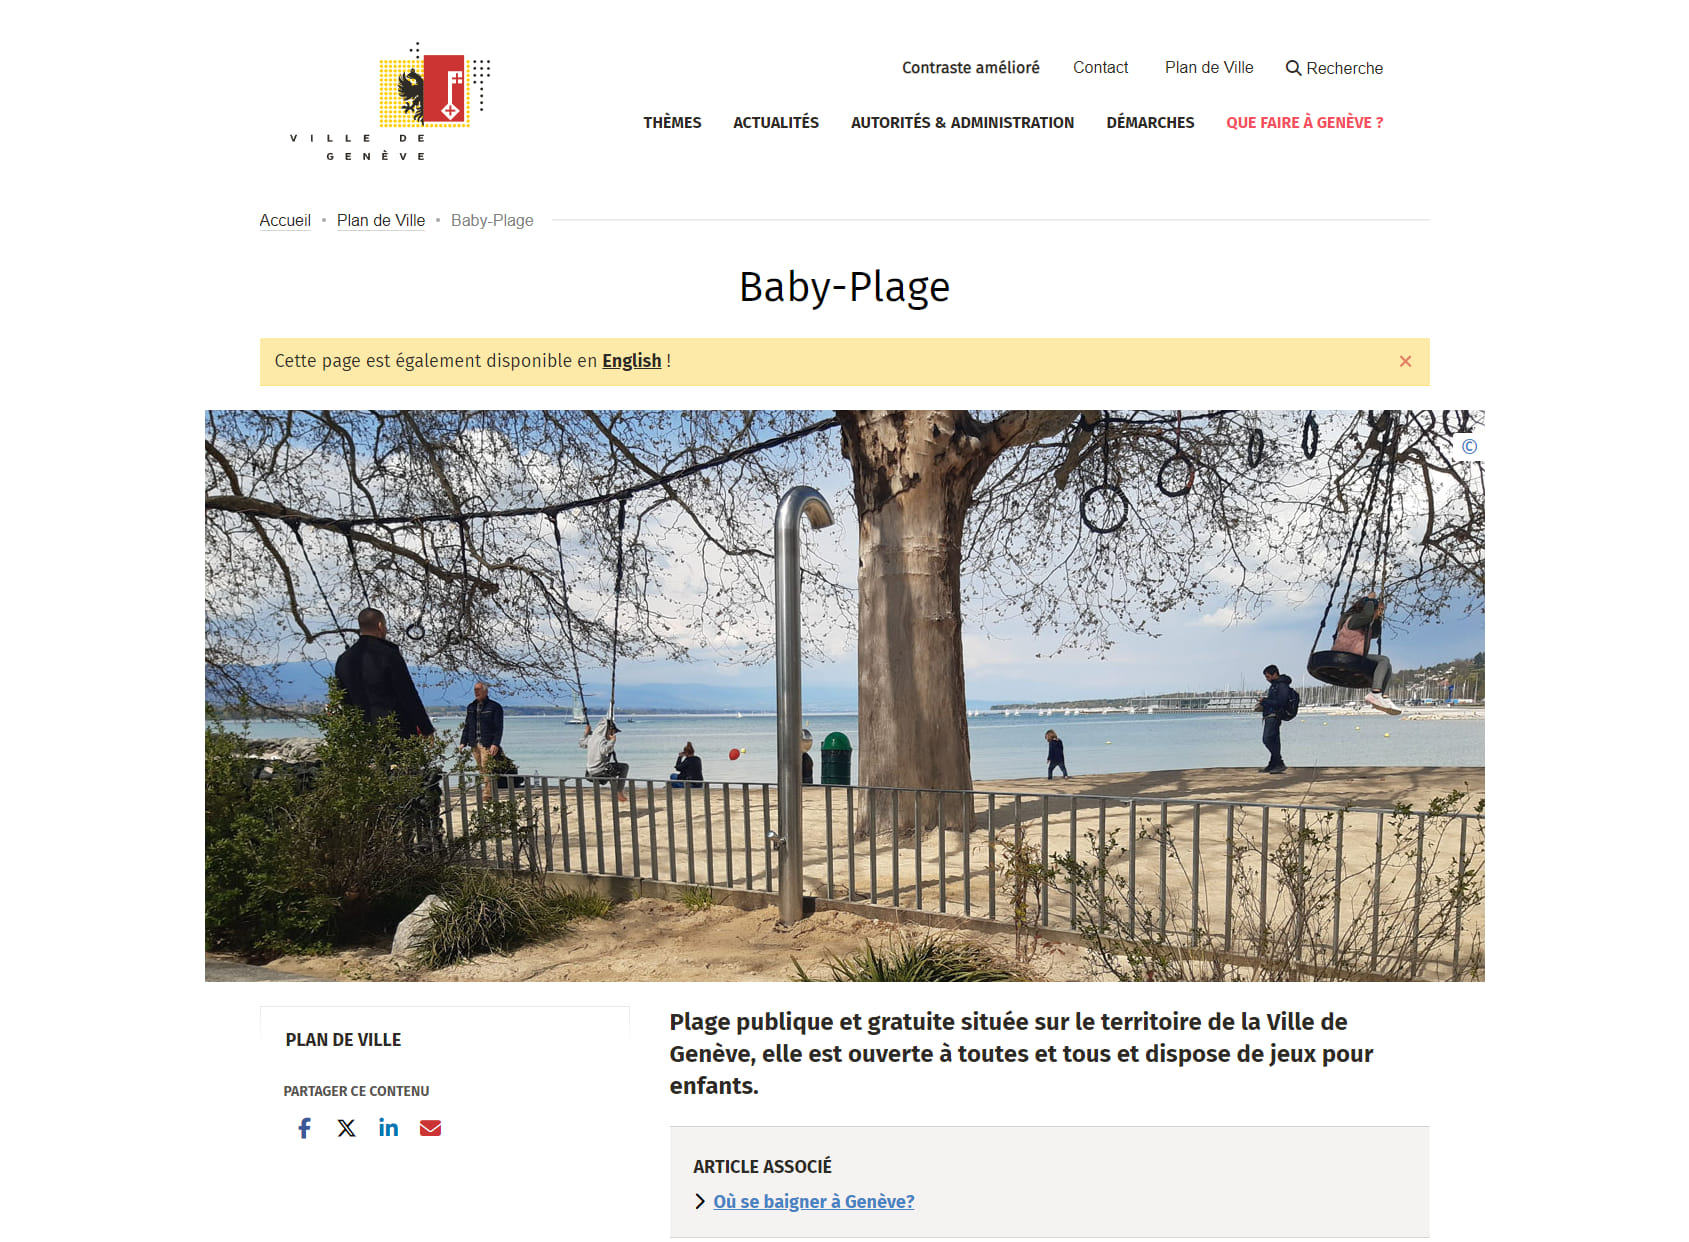 Baby-Plage